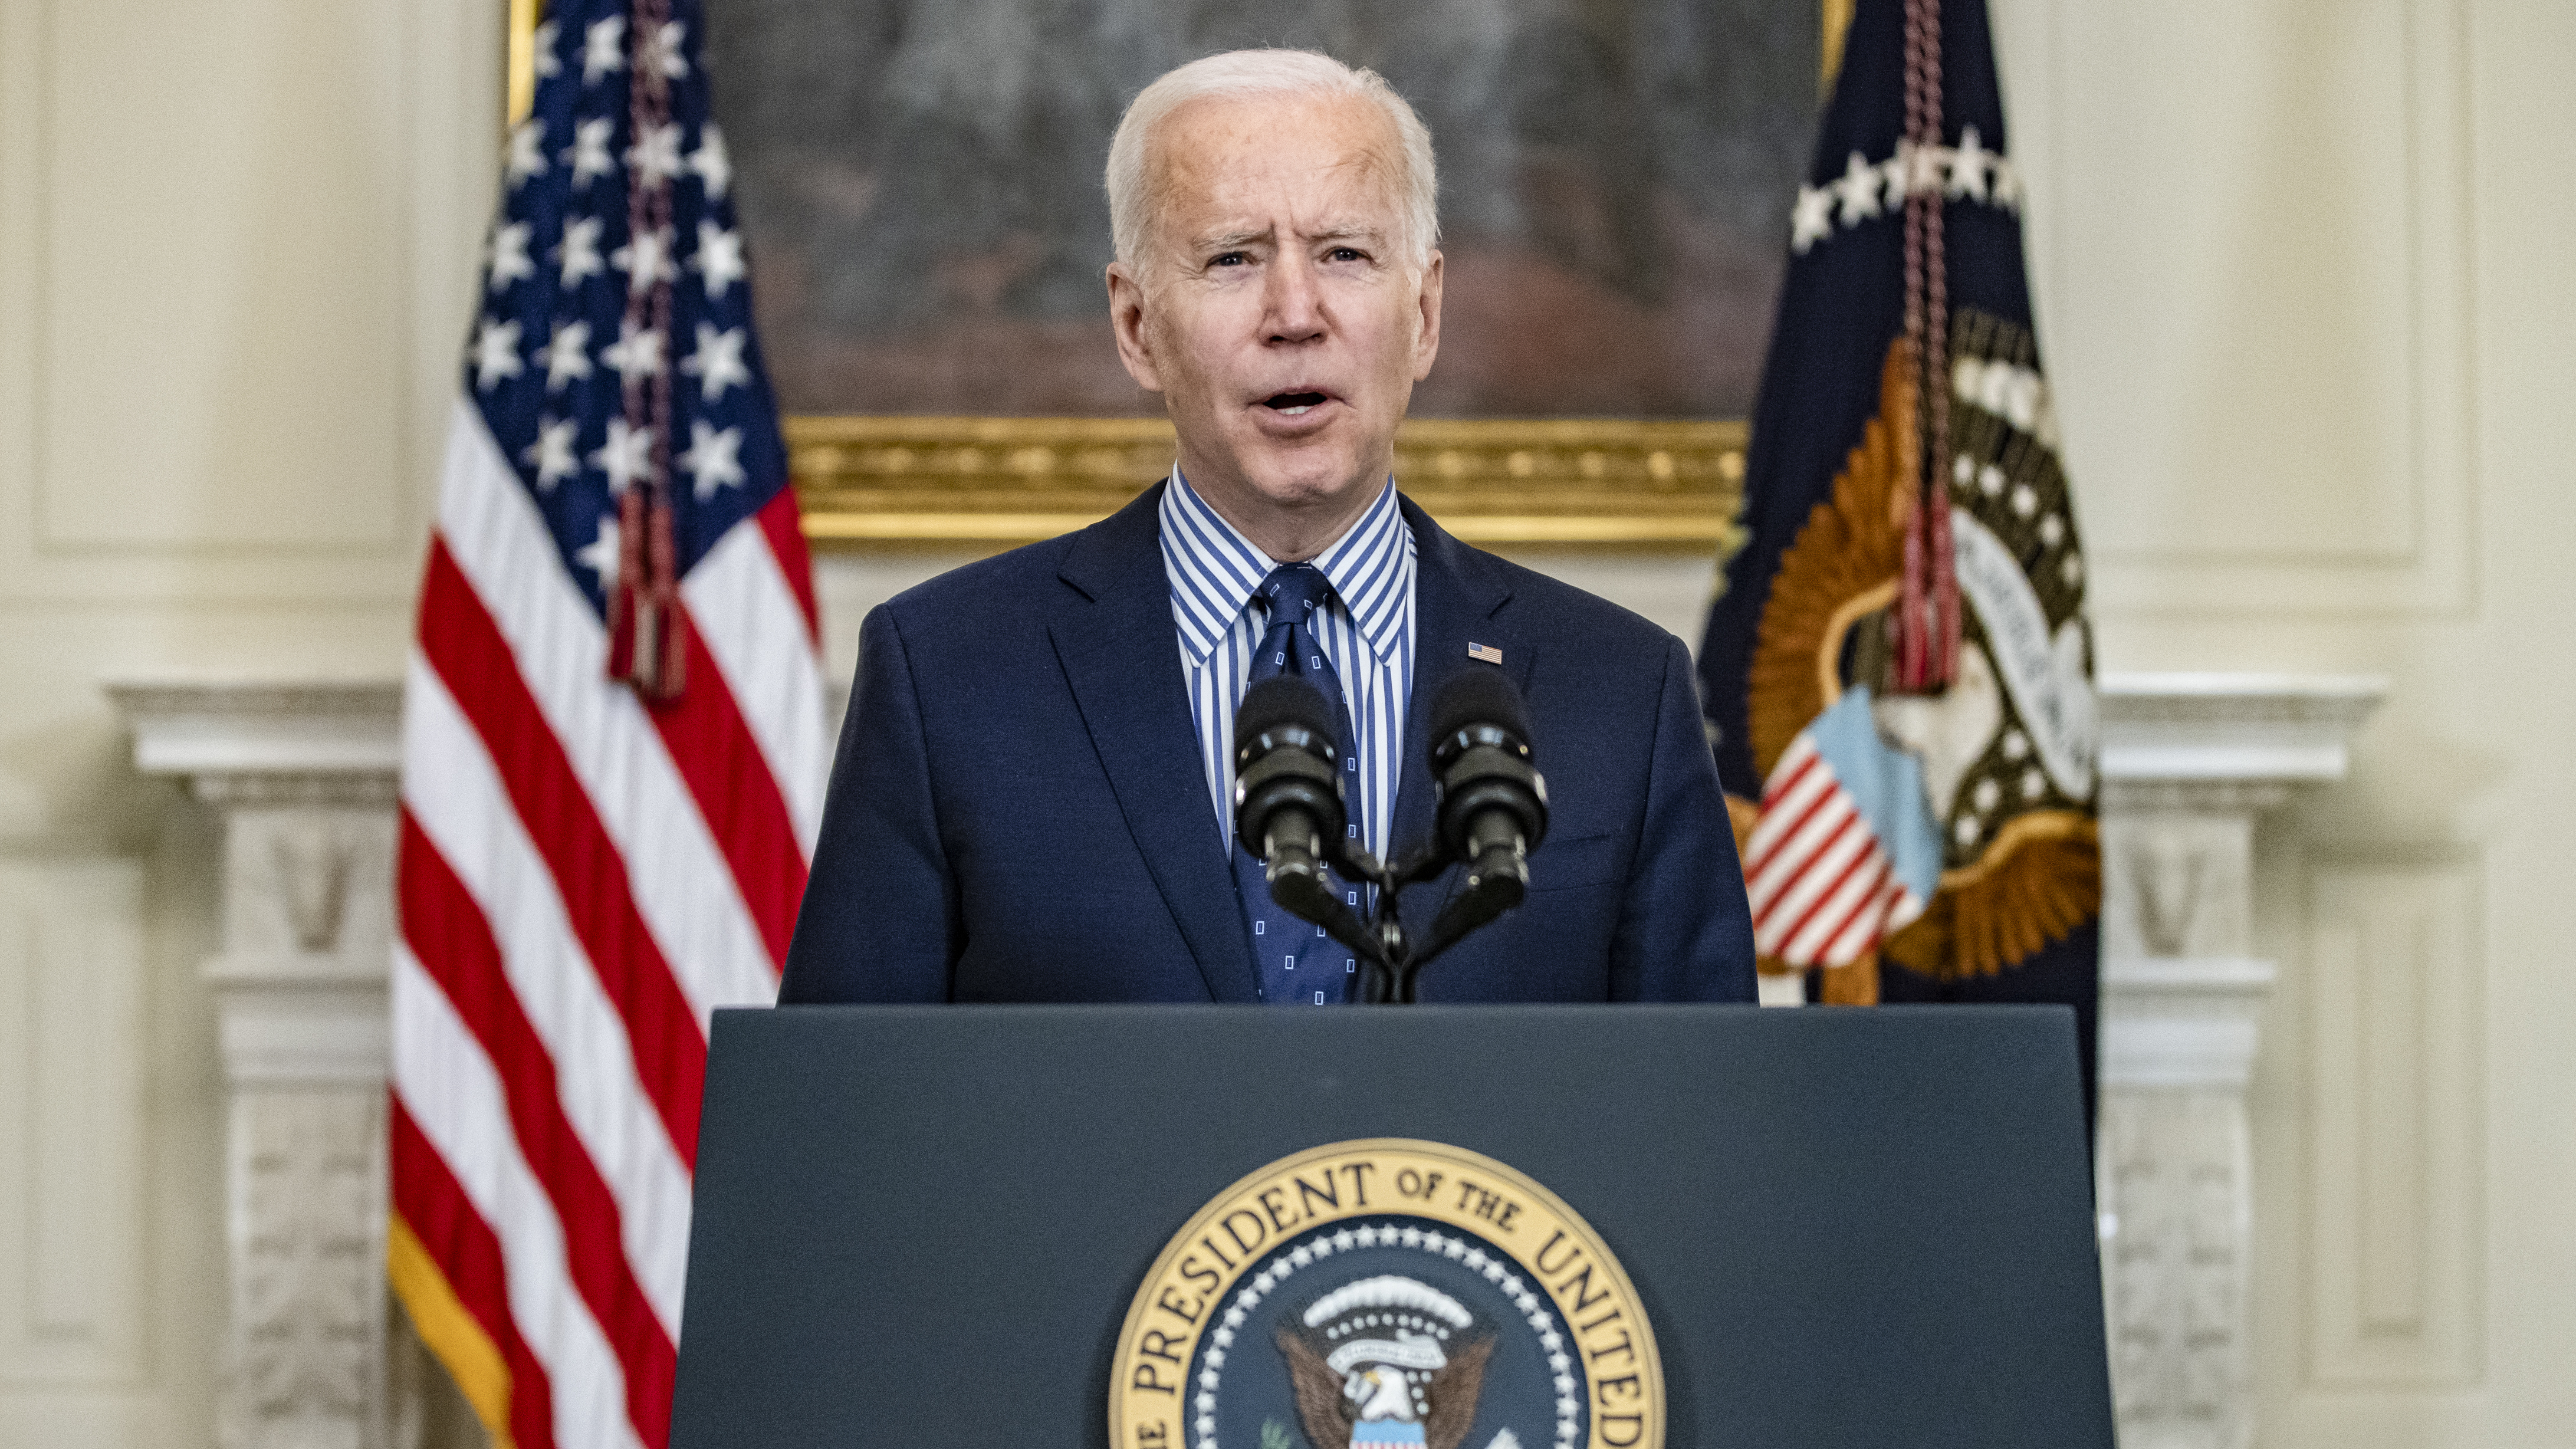 President Joe Biden speaks from the State Dining Room following the passage of the American Rescue Plan in the U.S. Senate at the White House on March 6, 2021. CREDIT: Samuel Corum/Getty Images